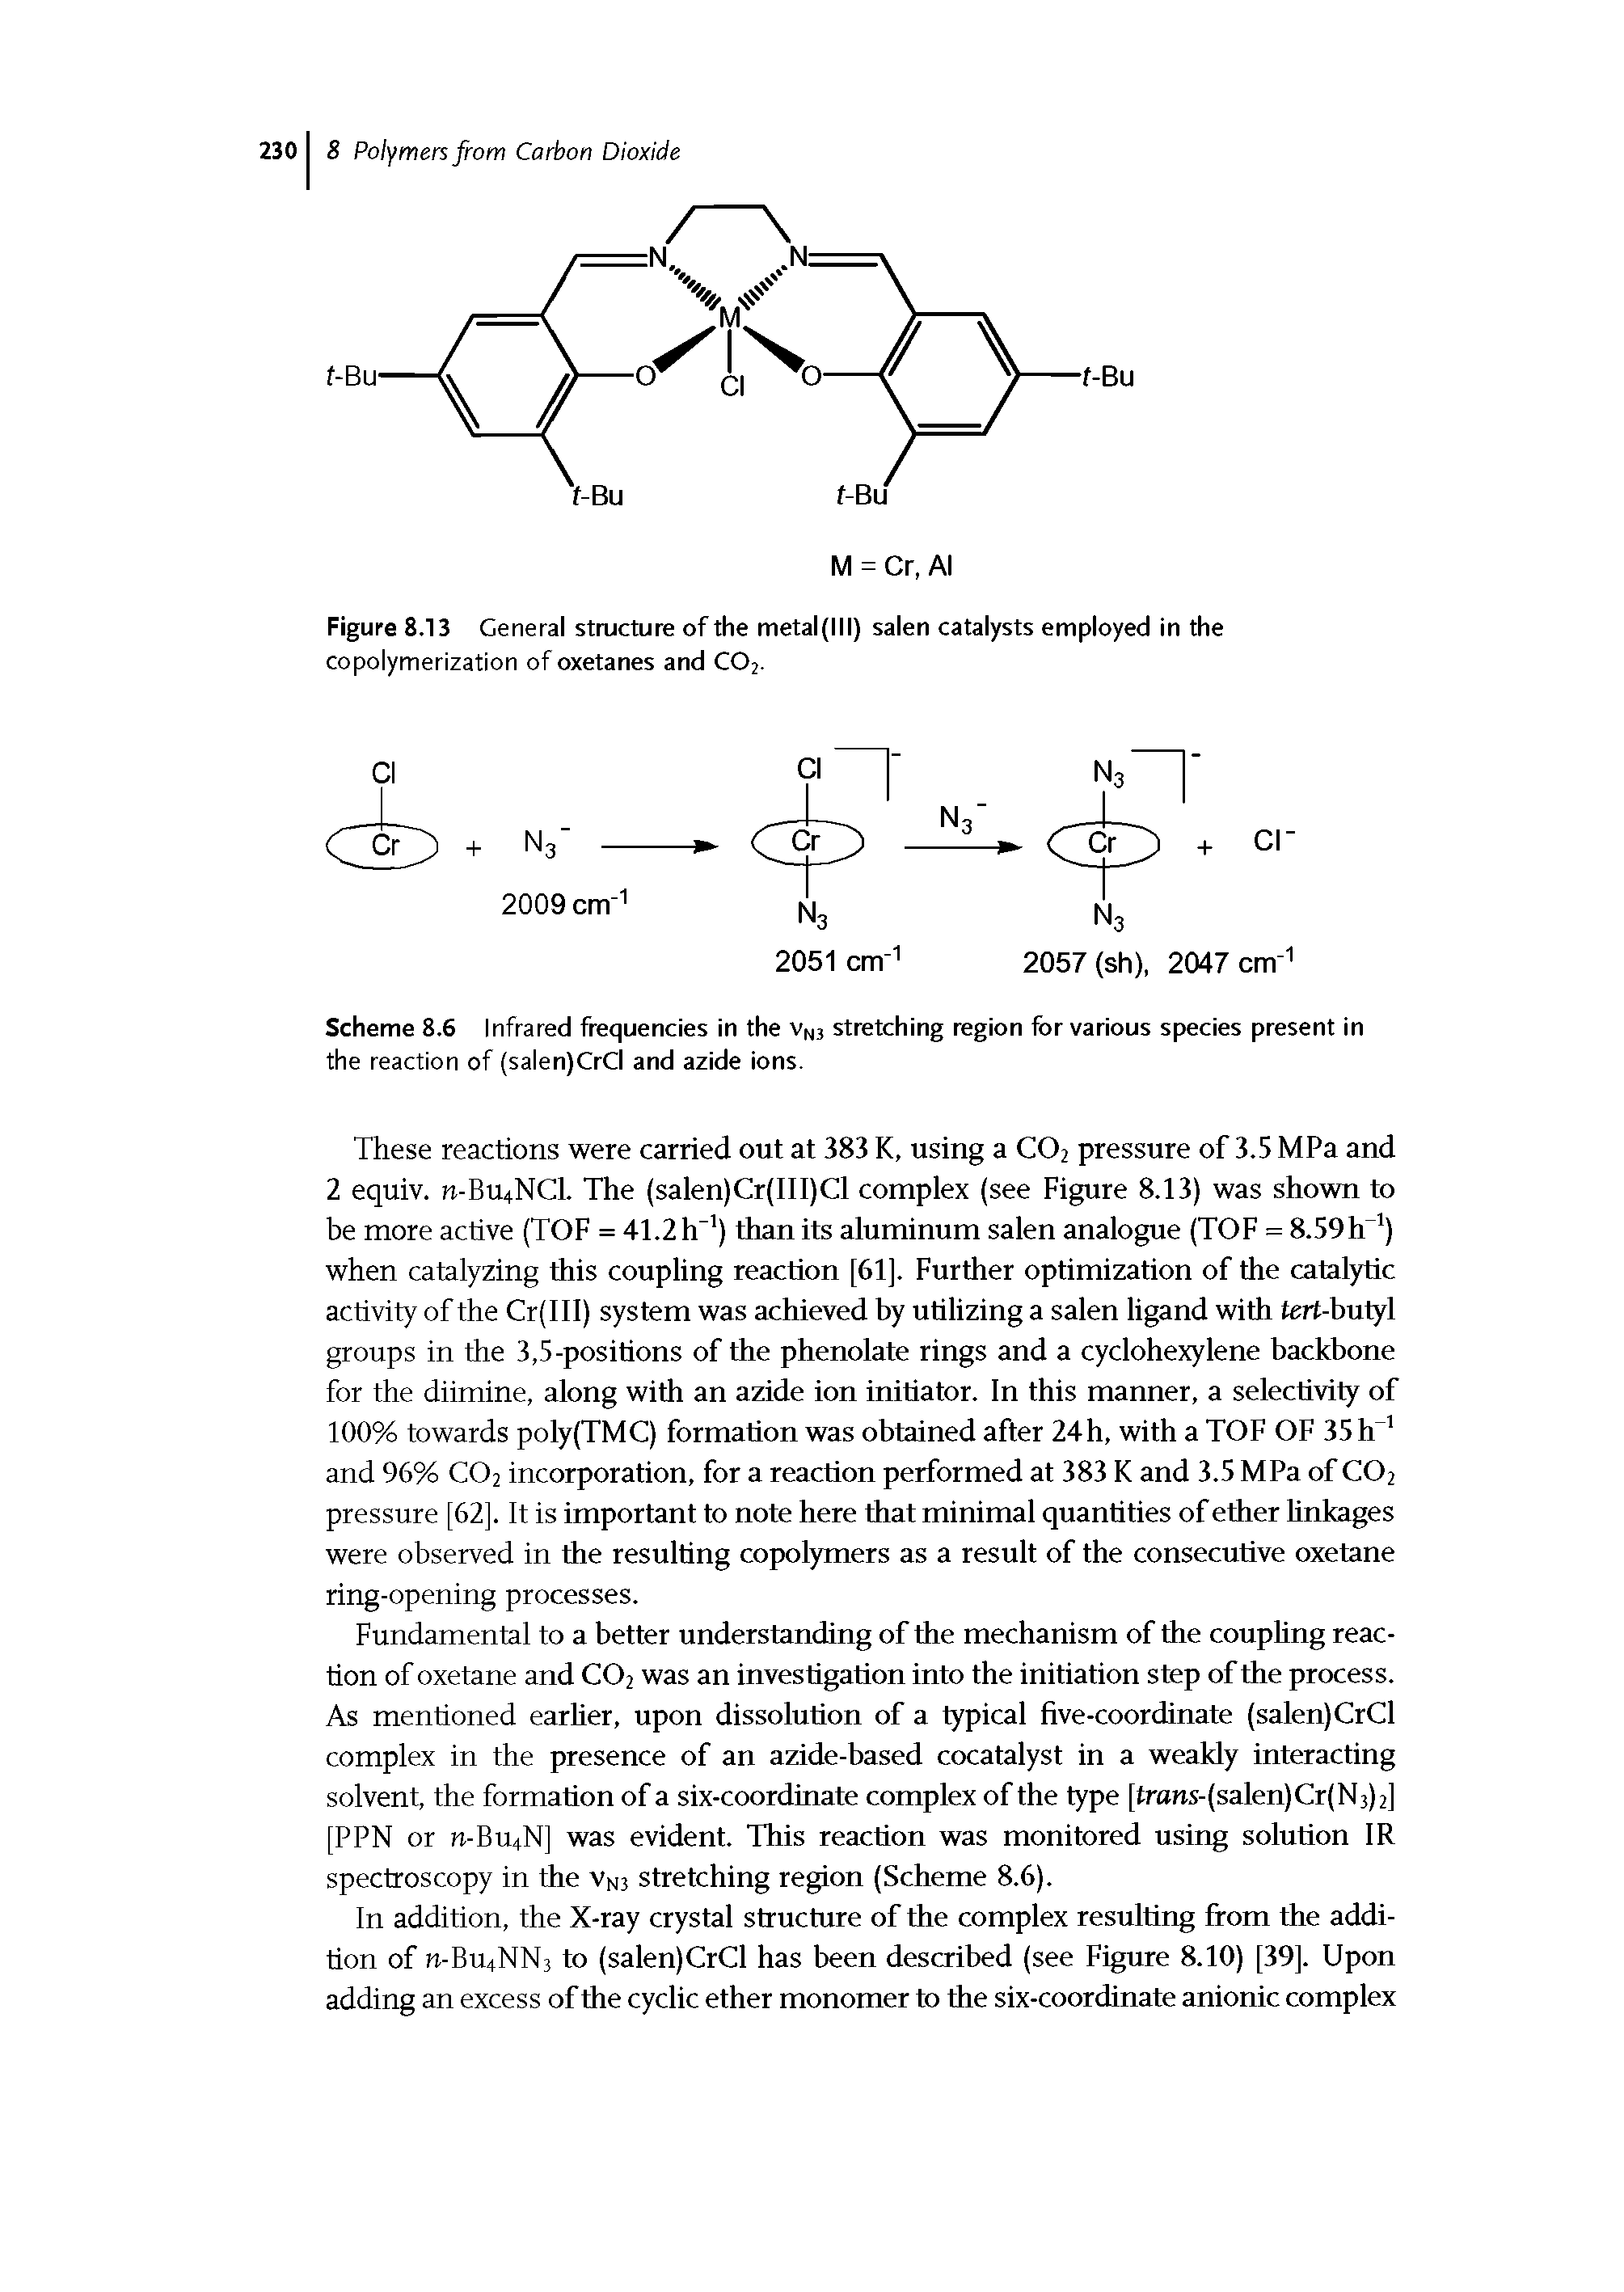 Figure 8.13 General structure of the metal (111) salen catalysts employed in the copolymerization of oxetanes and C02.